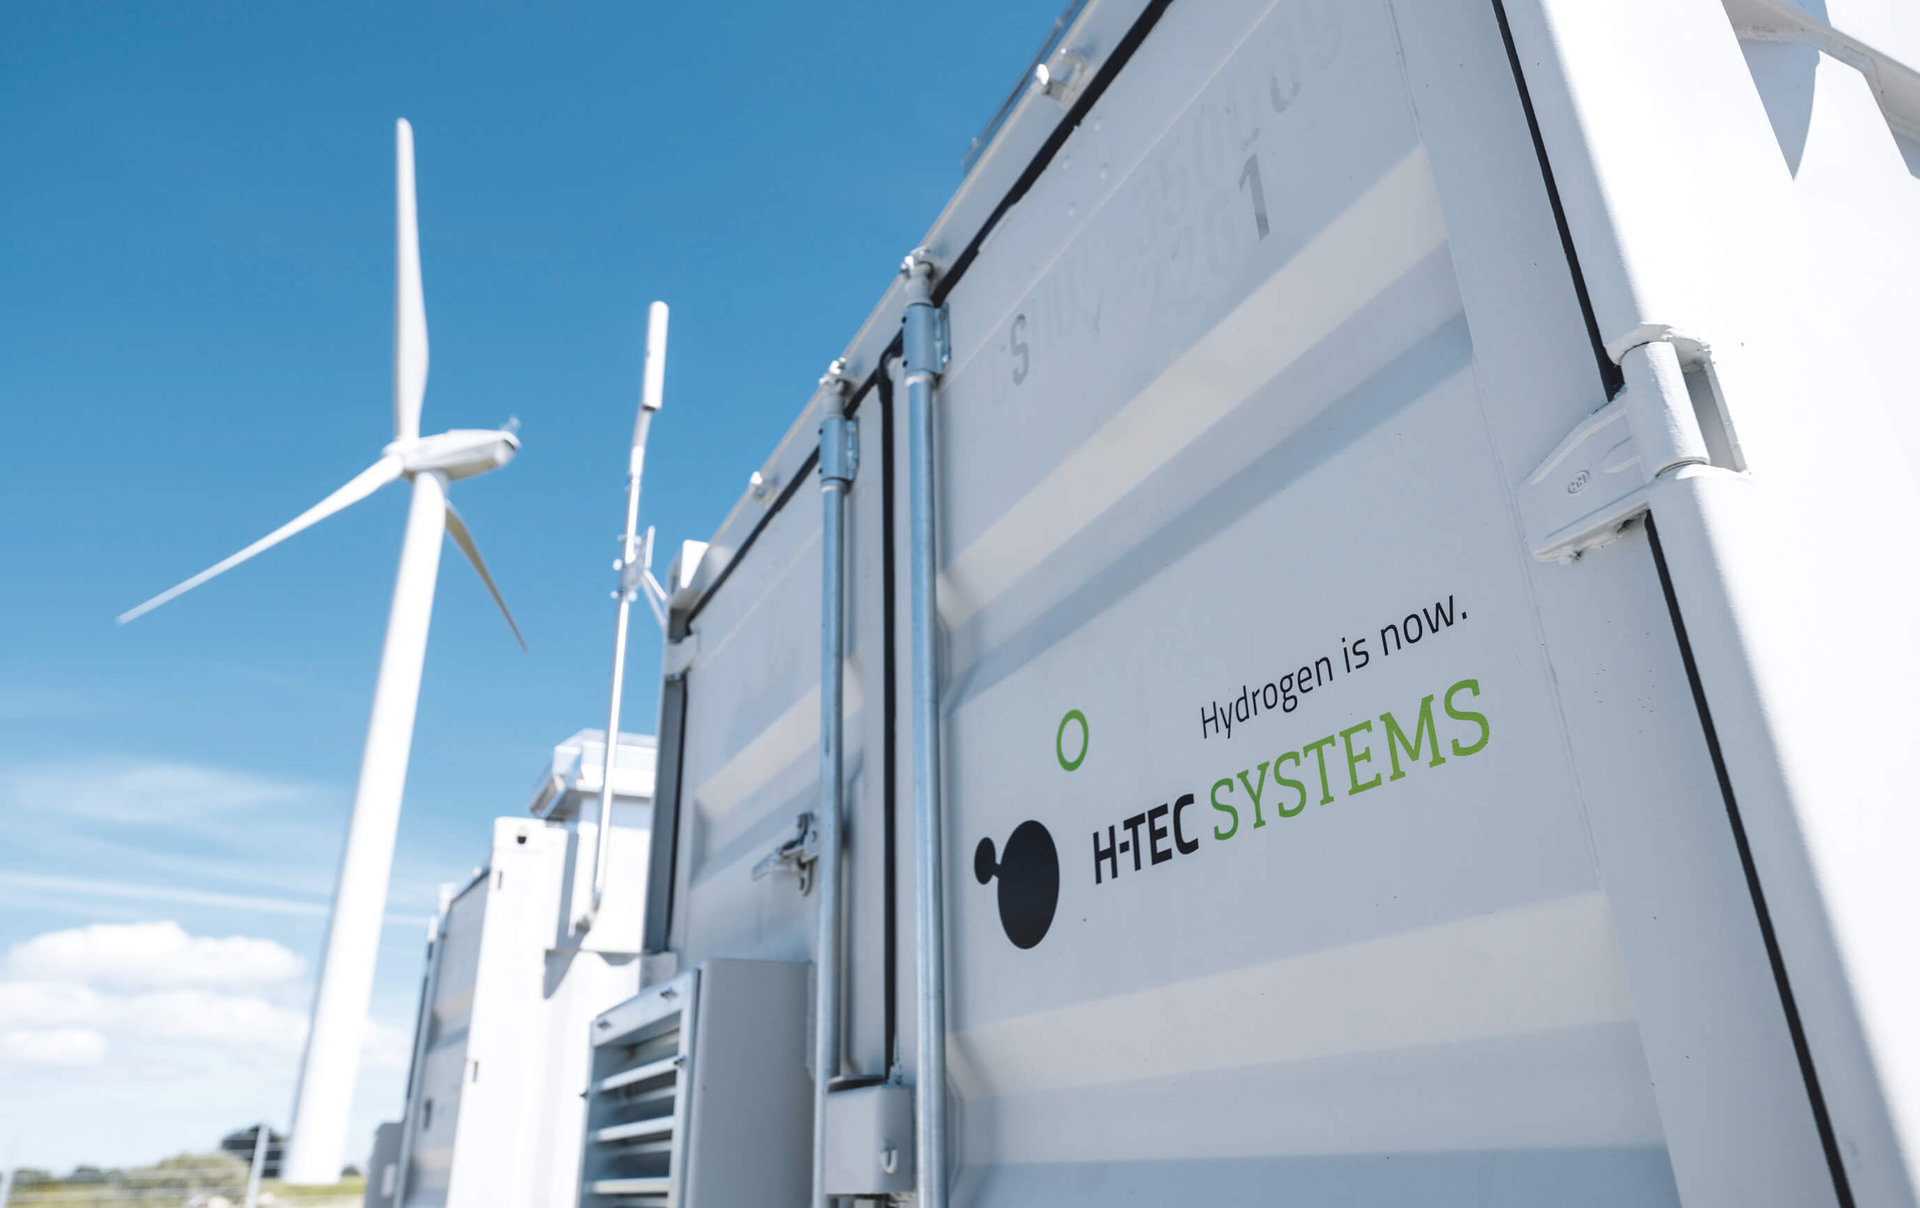 Hydrogen is now: Hydrogen technology from H-TEC SYSTEMS